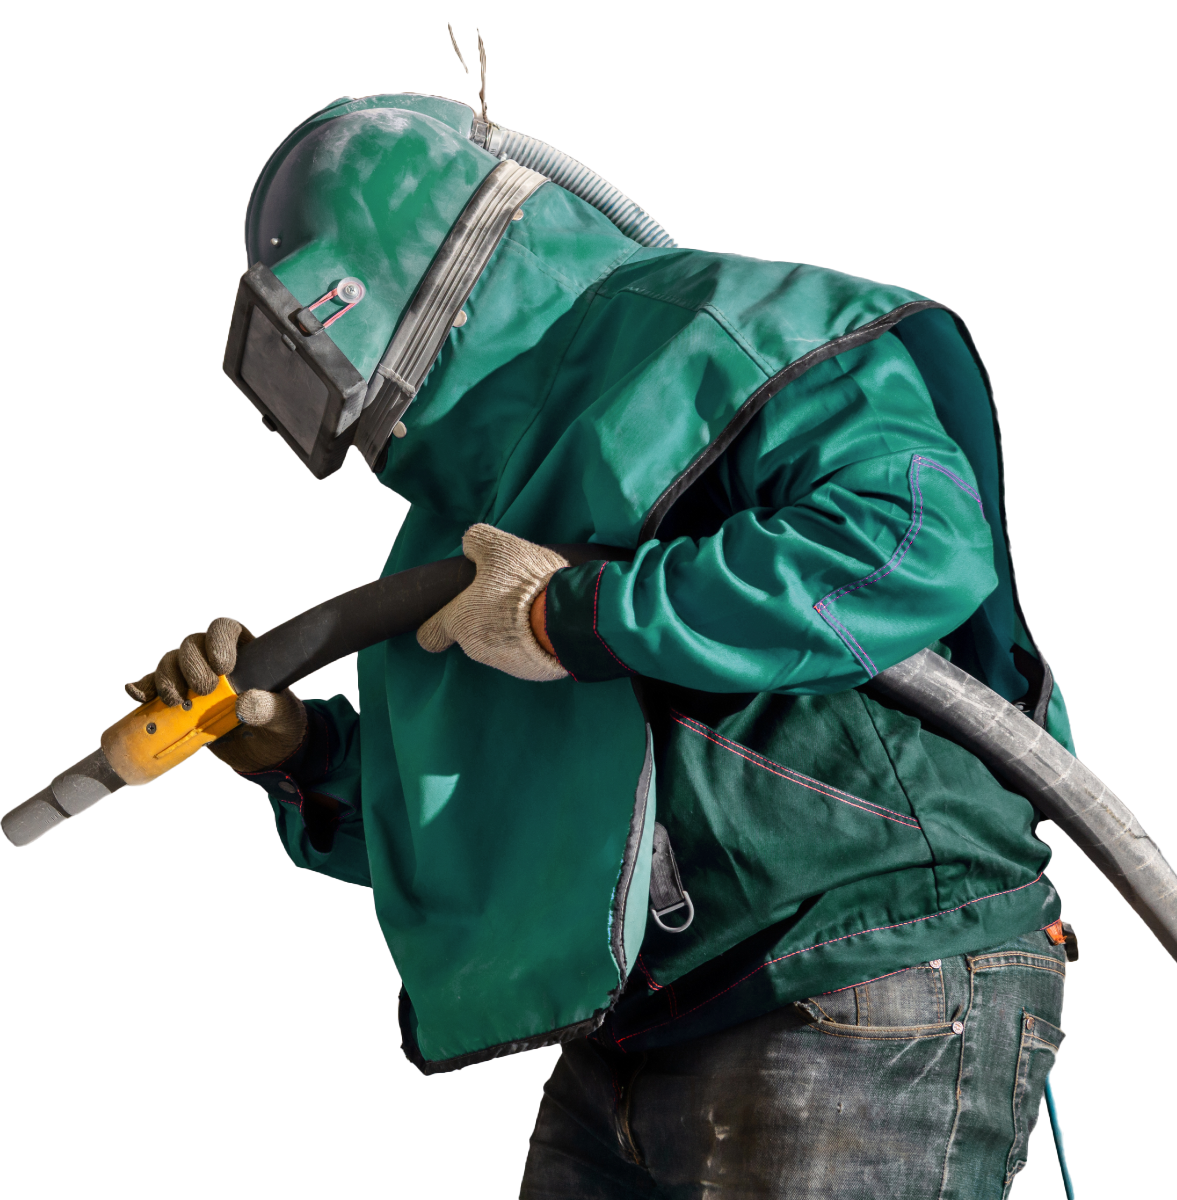 A man in a green jacket is sandblasting with a hose.